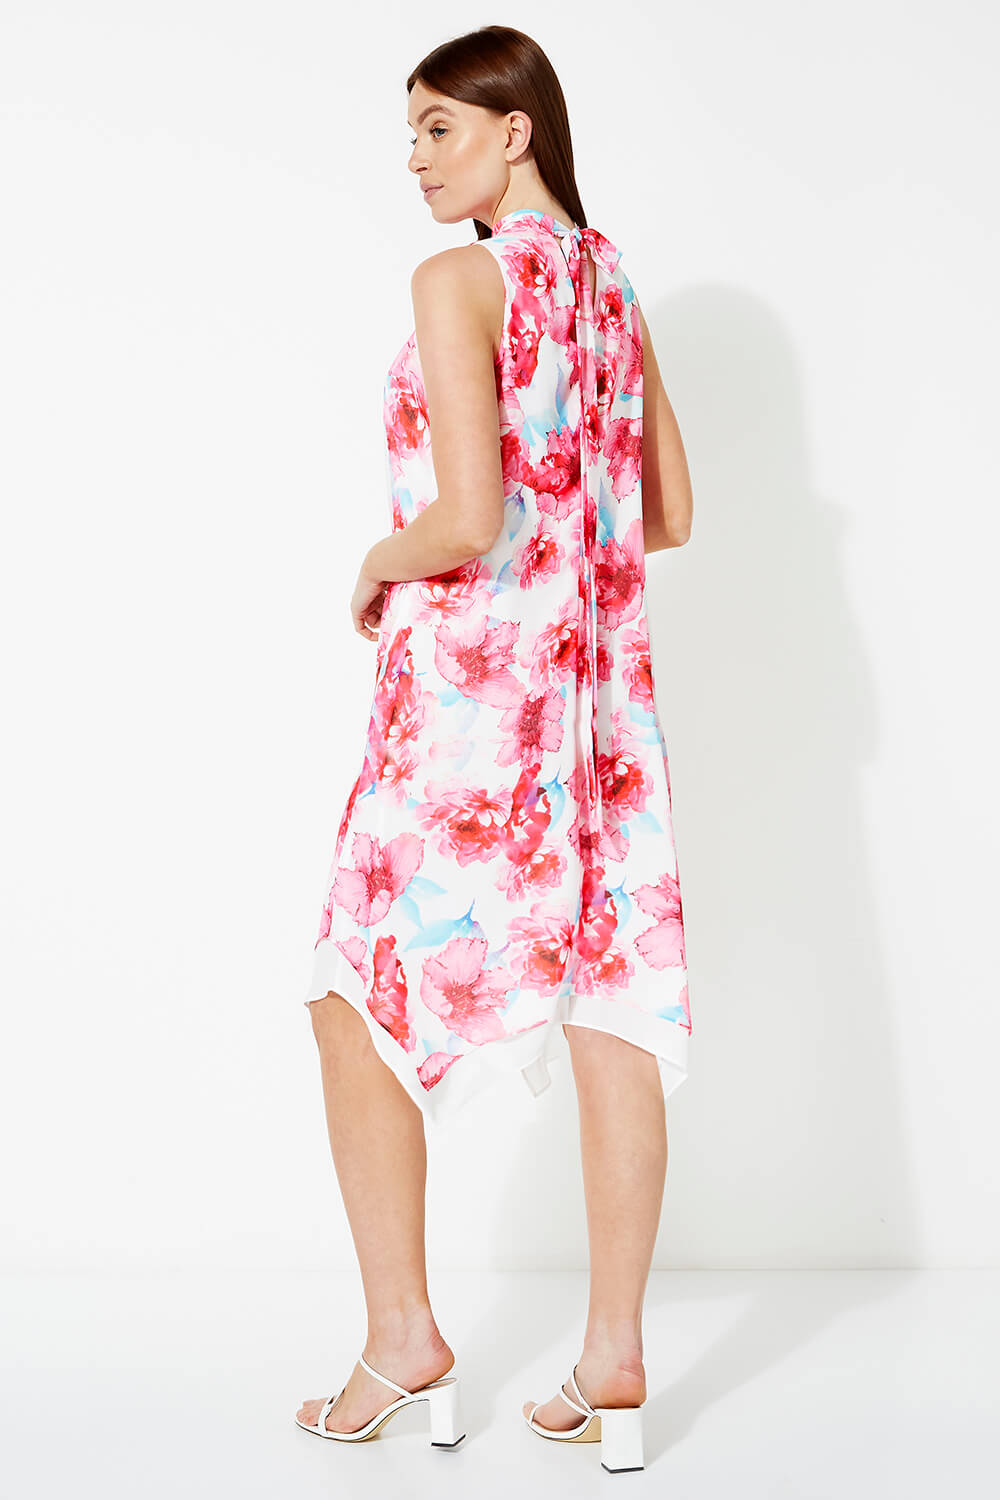 PINK High Neck Floral Print Swing Dress, Image 2 of 5